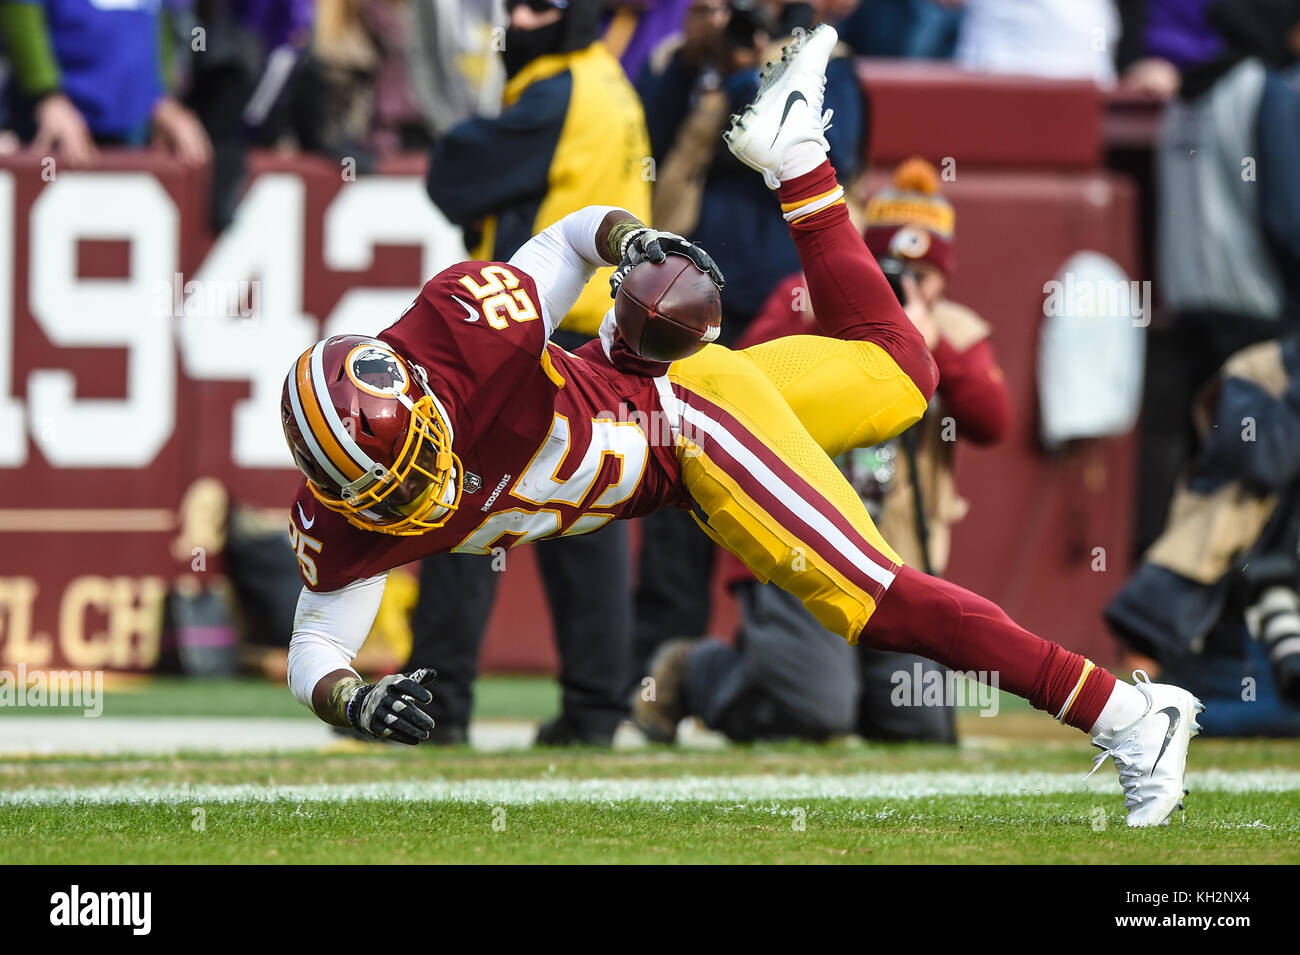 Landover, MD, USA. 12th Nov, 2017. Washington Redskins running back Chris Thompson (25) catches the pass on the 5 yard line during the matchup between the Minnesota Vikings and the Washington Redskins at FedEx Field in Landover, MD. Credit: csm/Alamy Live News Stock Photo